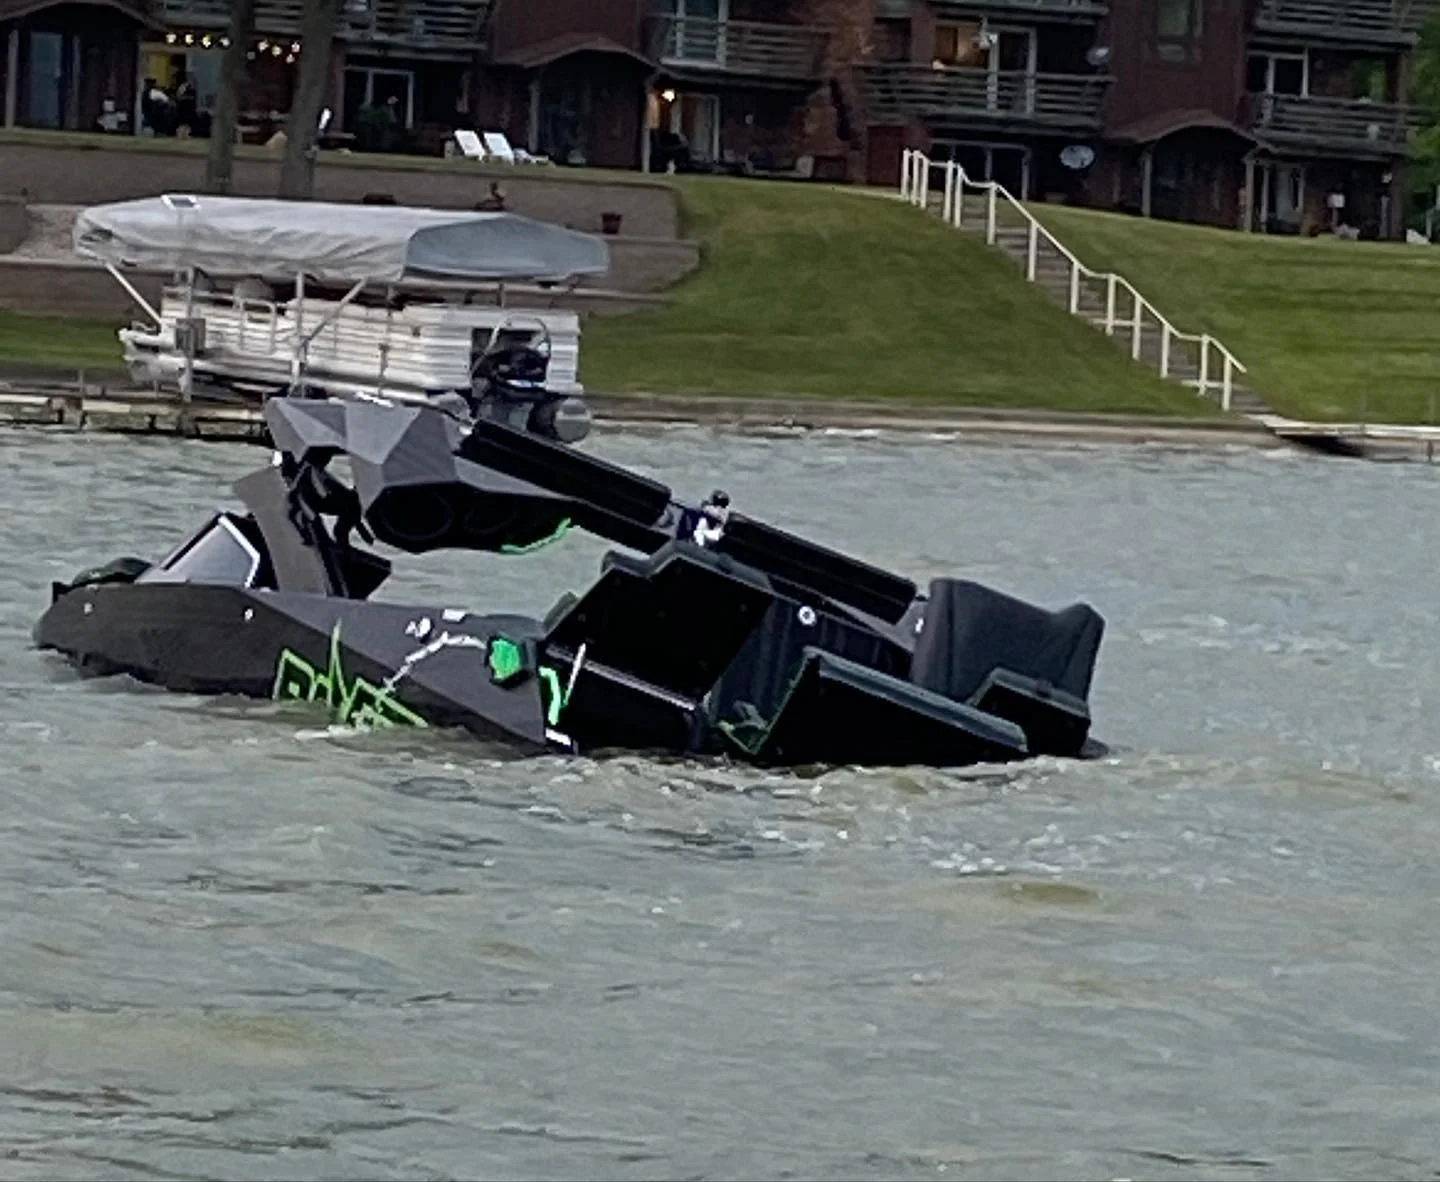 Man Sinks Boat, Then F-150 Raptor And Wrangler Trying To 